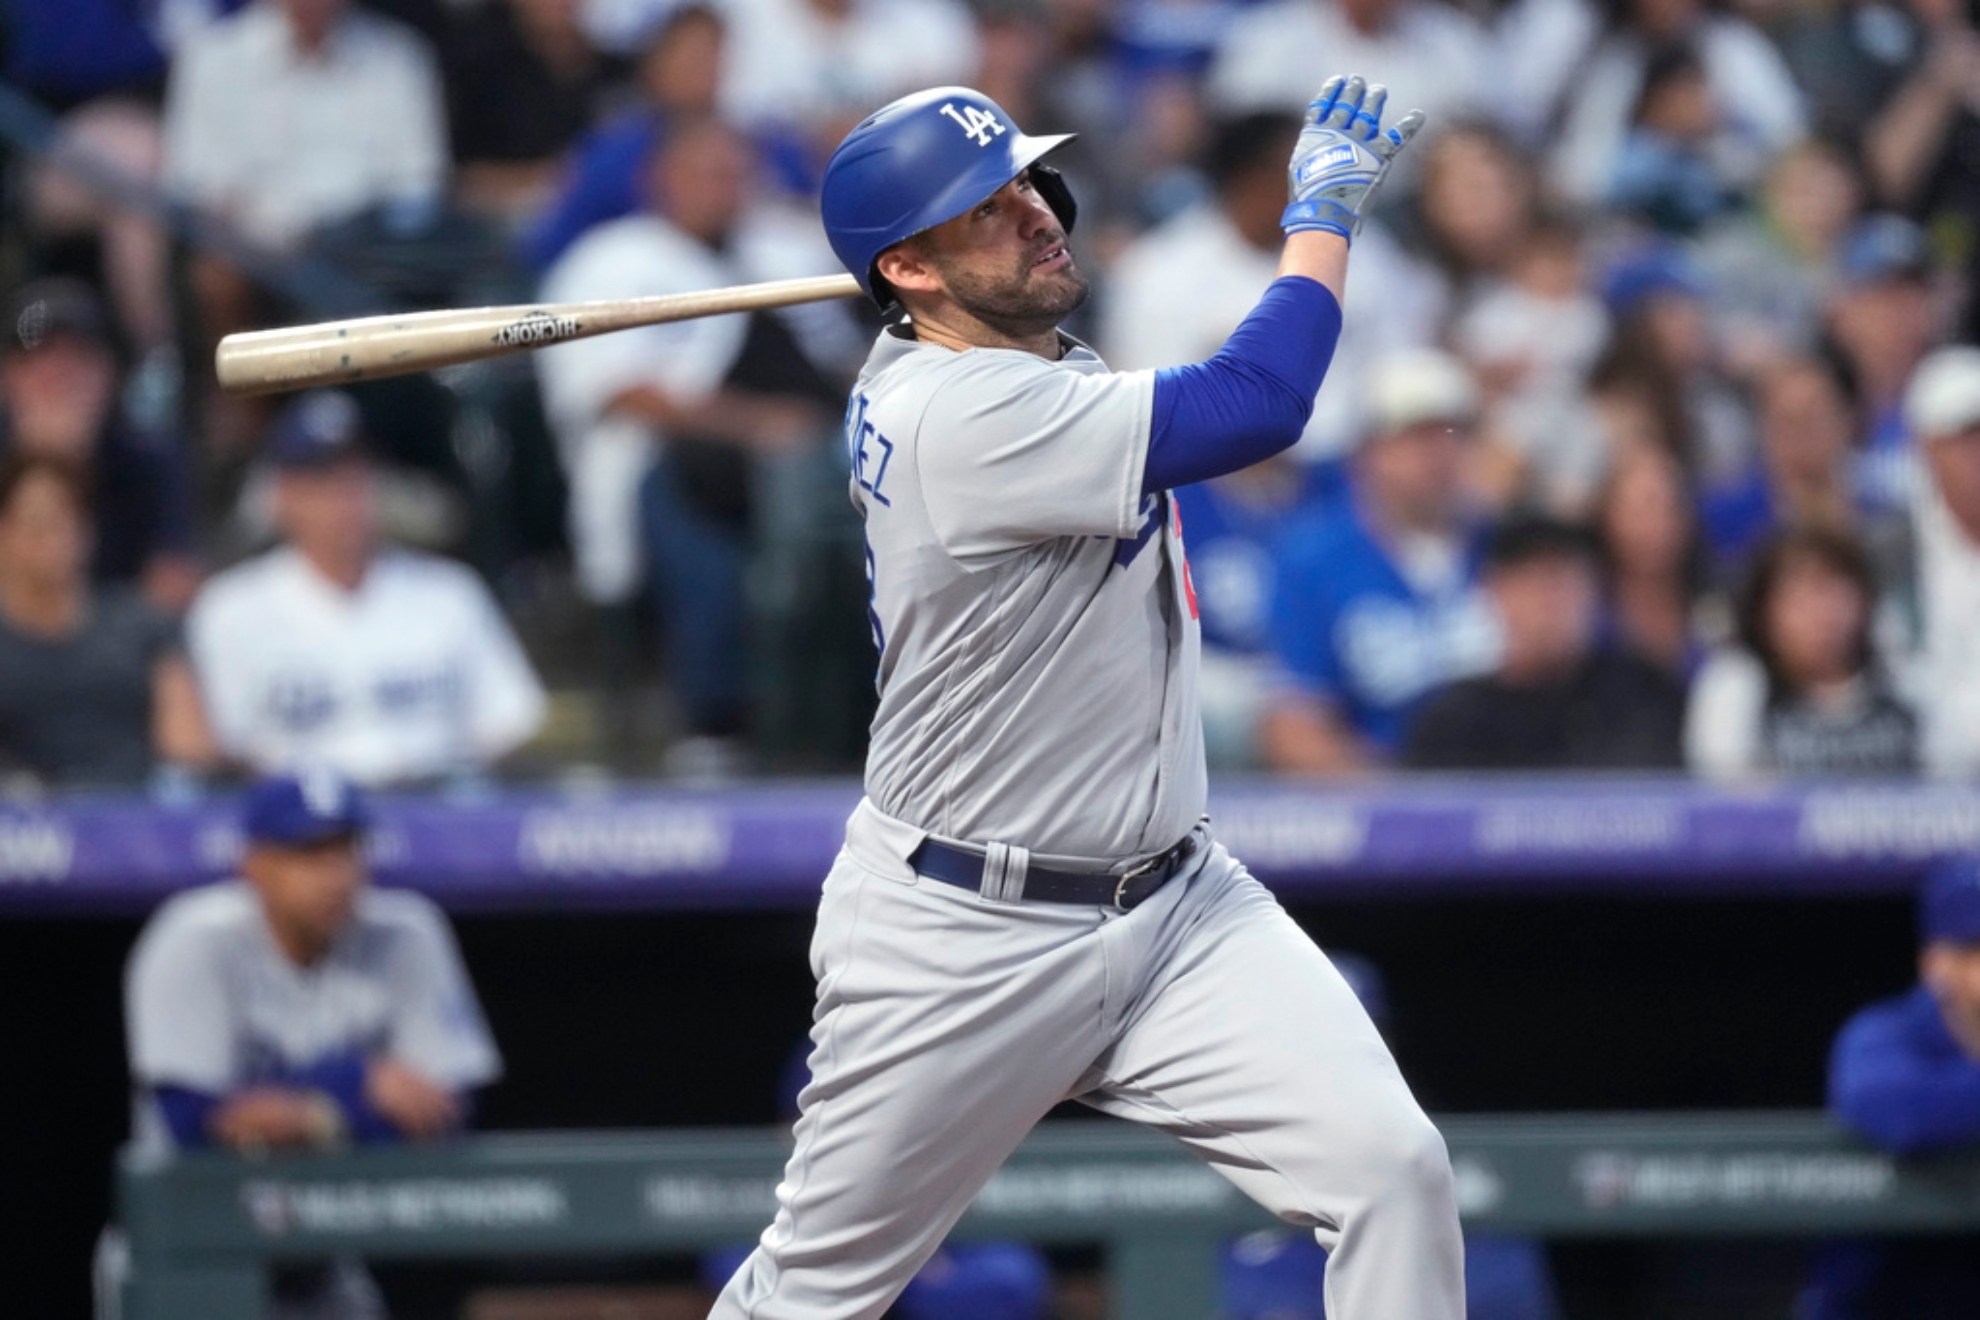 New York Mets sign veteran heavy hitter J.D. Martinez, how much did they pay for his contract?